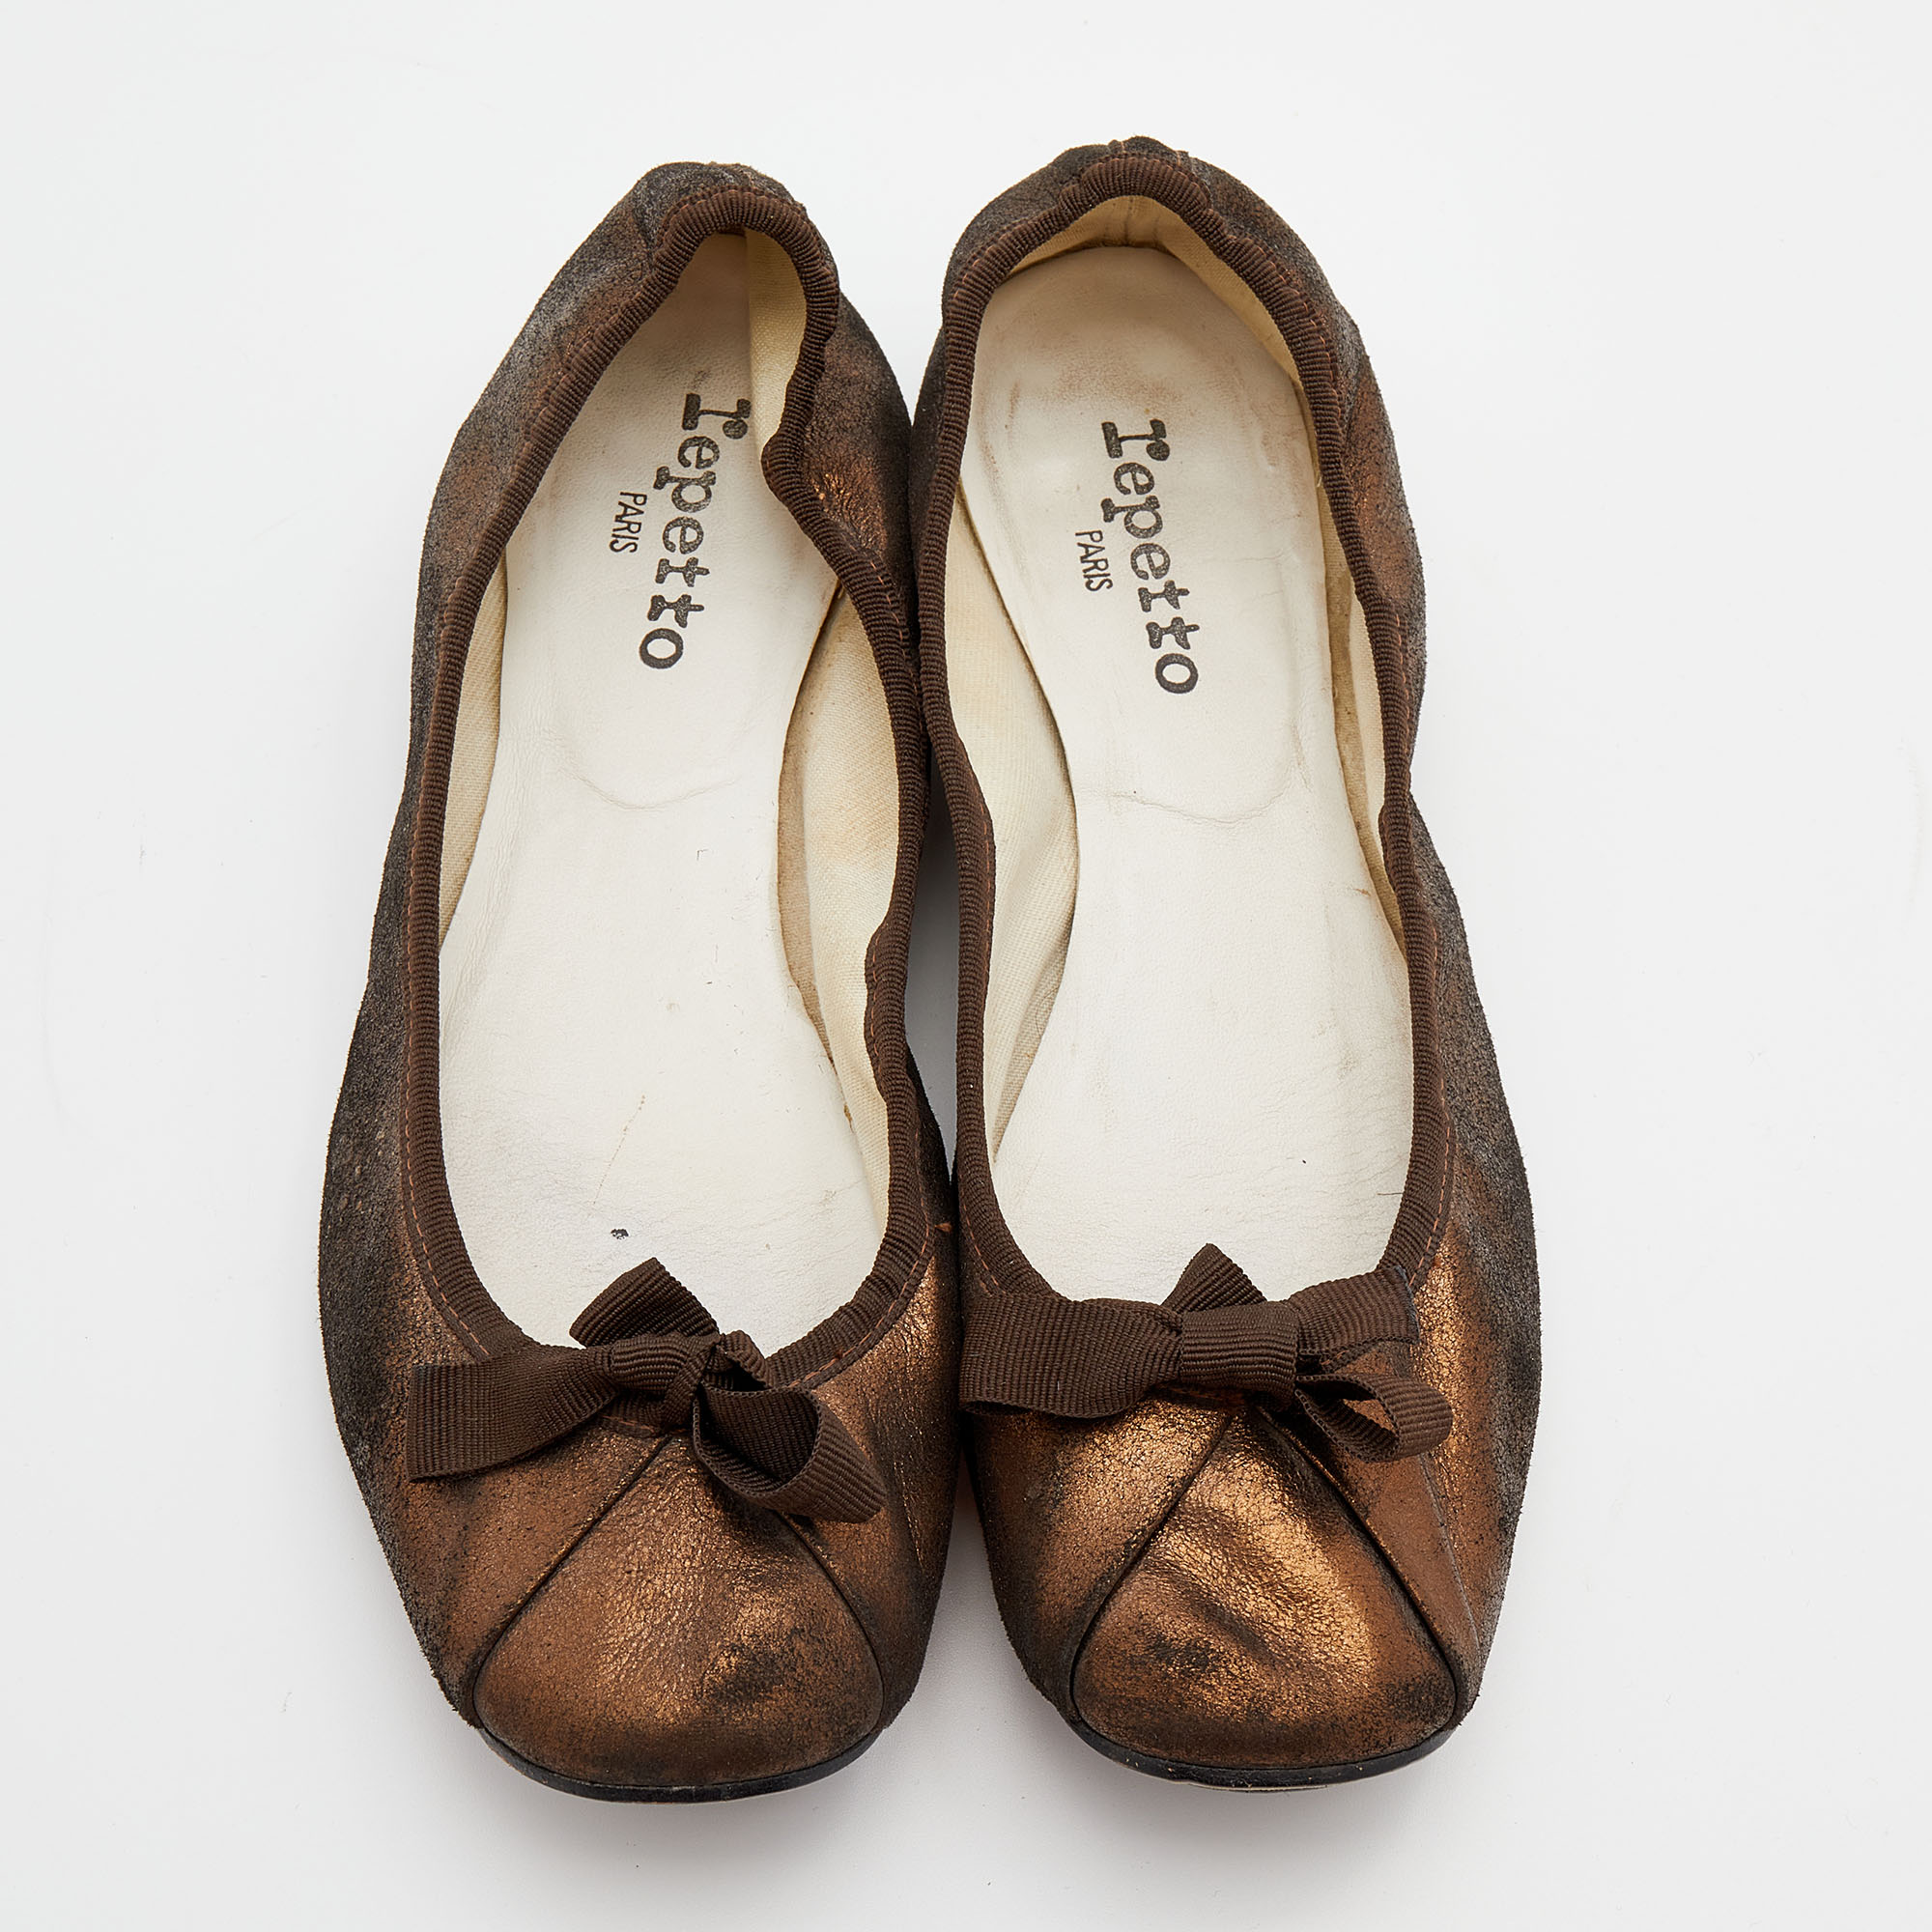 Repetto Metallic Bronze Suede Bow Ballet Flats Size 41